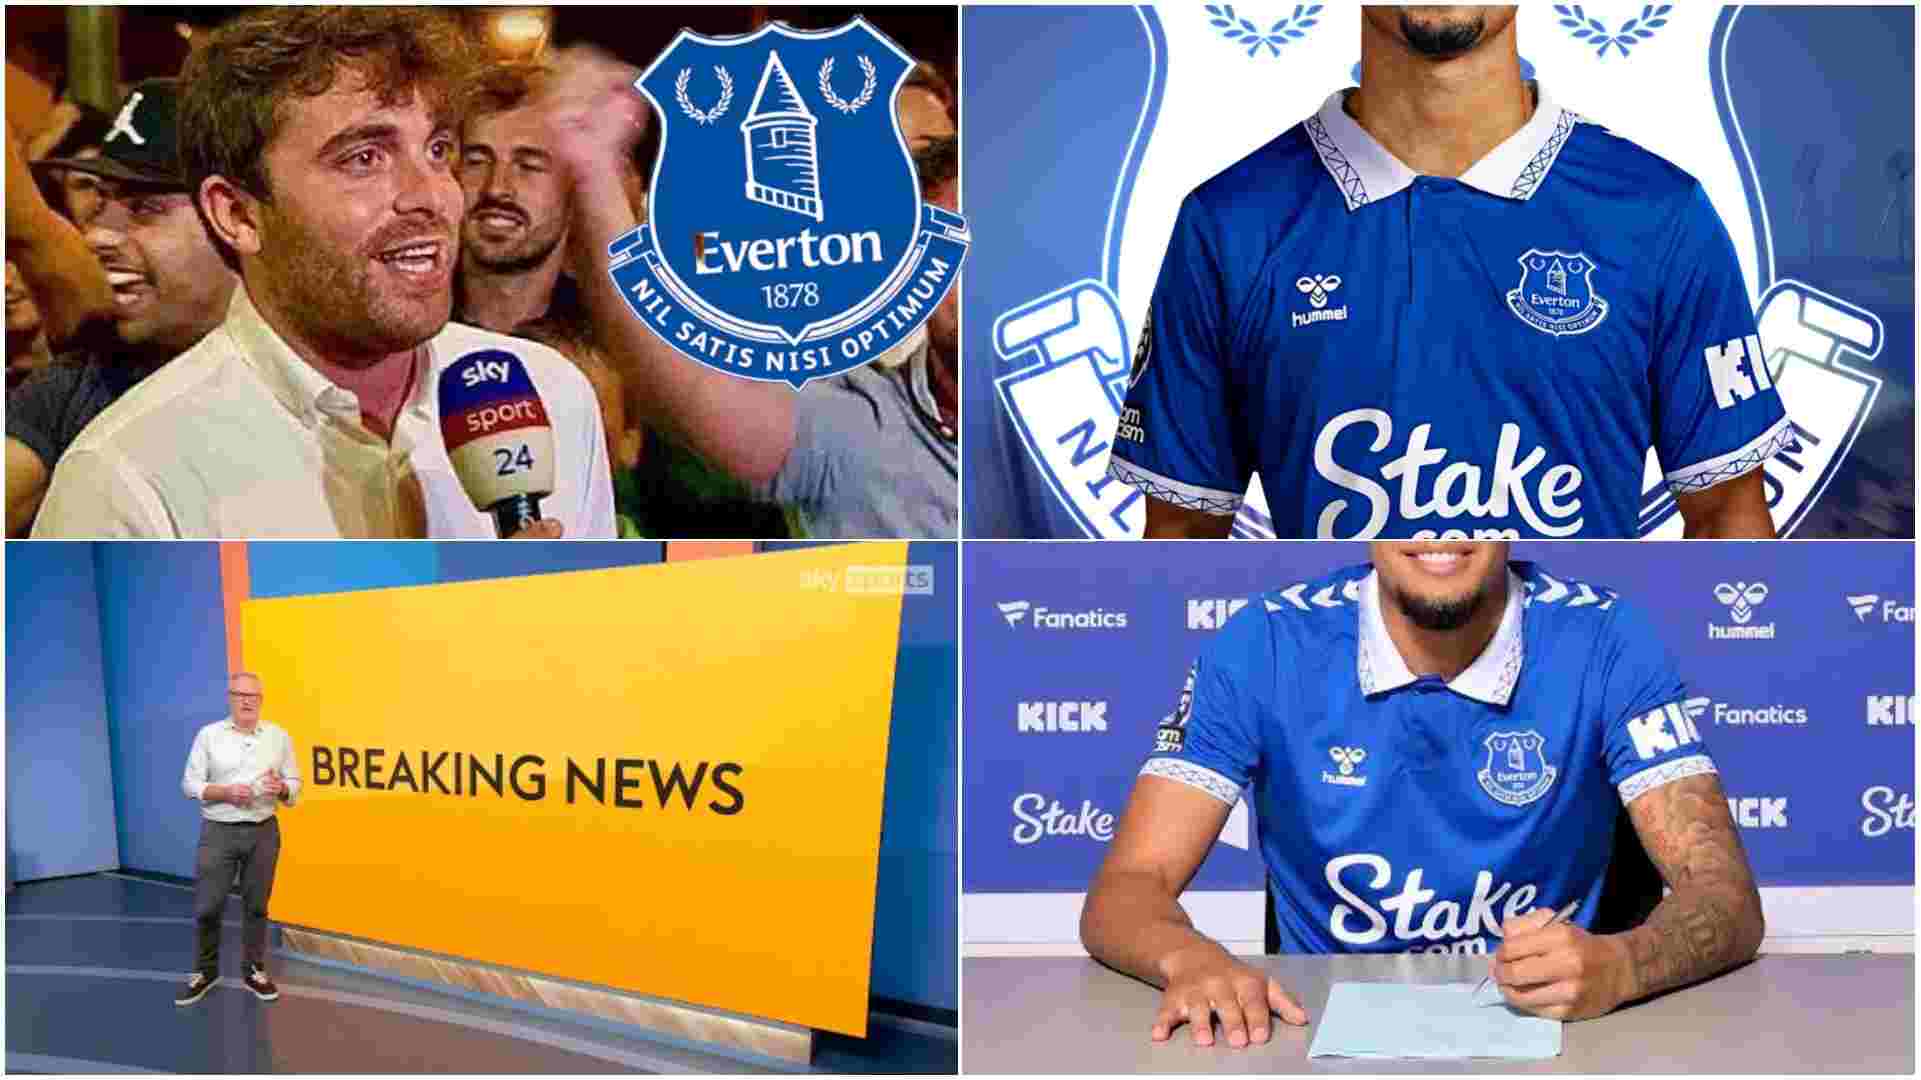 DONE DEAL, Here We Go – Everton have struck an Agreement with French giants in place for €18.5m deal, Terms Accepted and contracts are set to be signed, Five year deal at Everton SIGNED despite other PL clubs interest he only wanted Everton